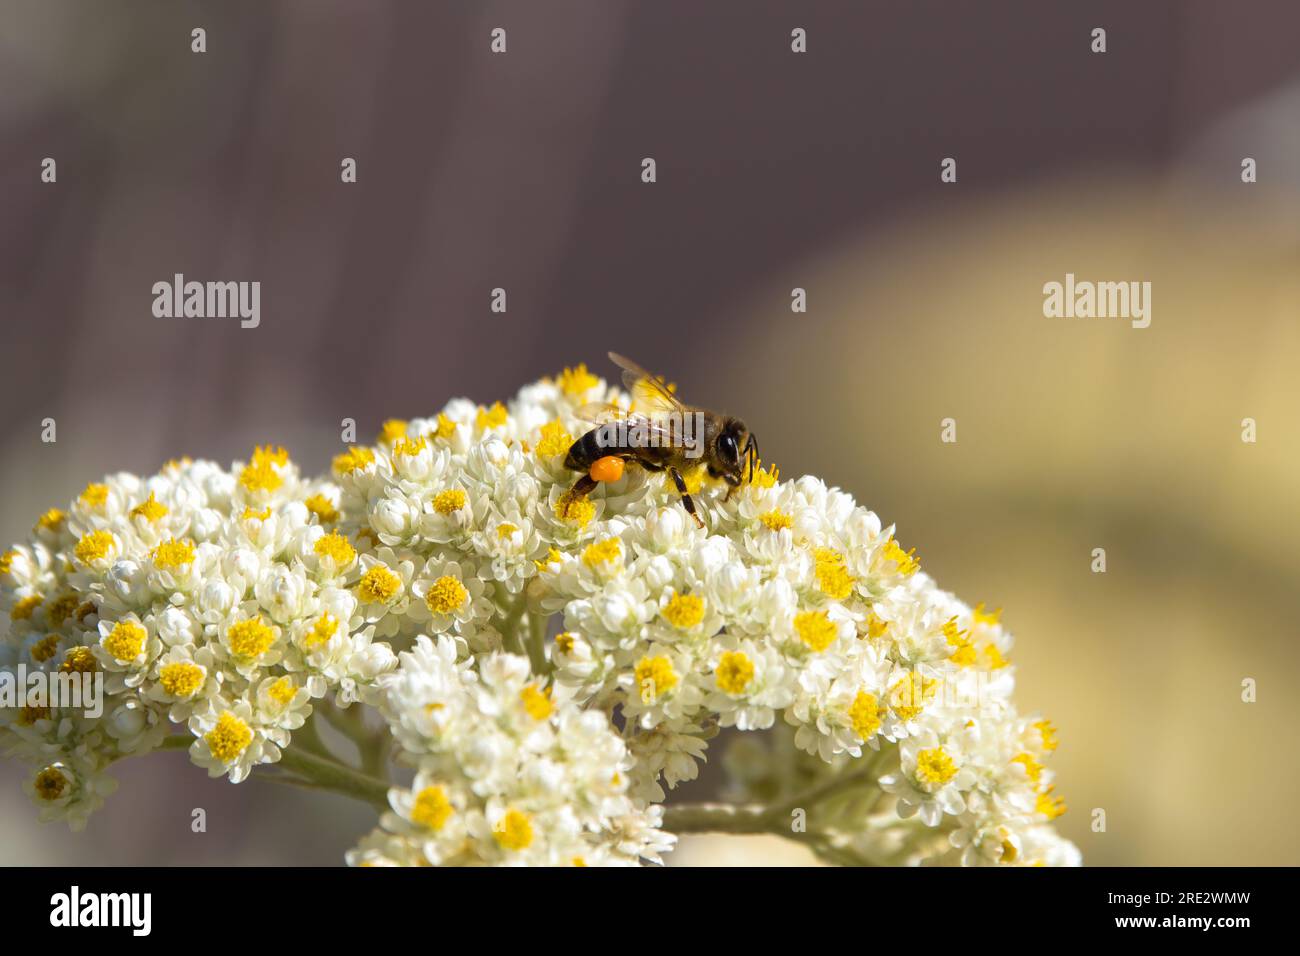 Cape Honey Bee (Apis mellifera capensis) Collecting Pollen On Everlasting Flowers Stock Photo